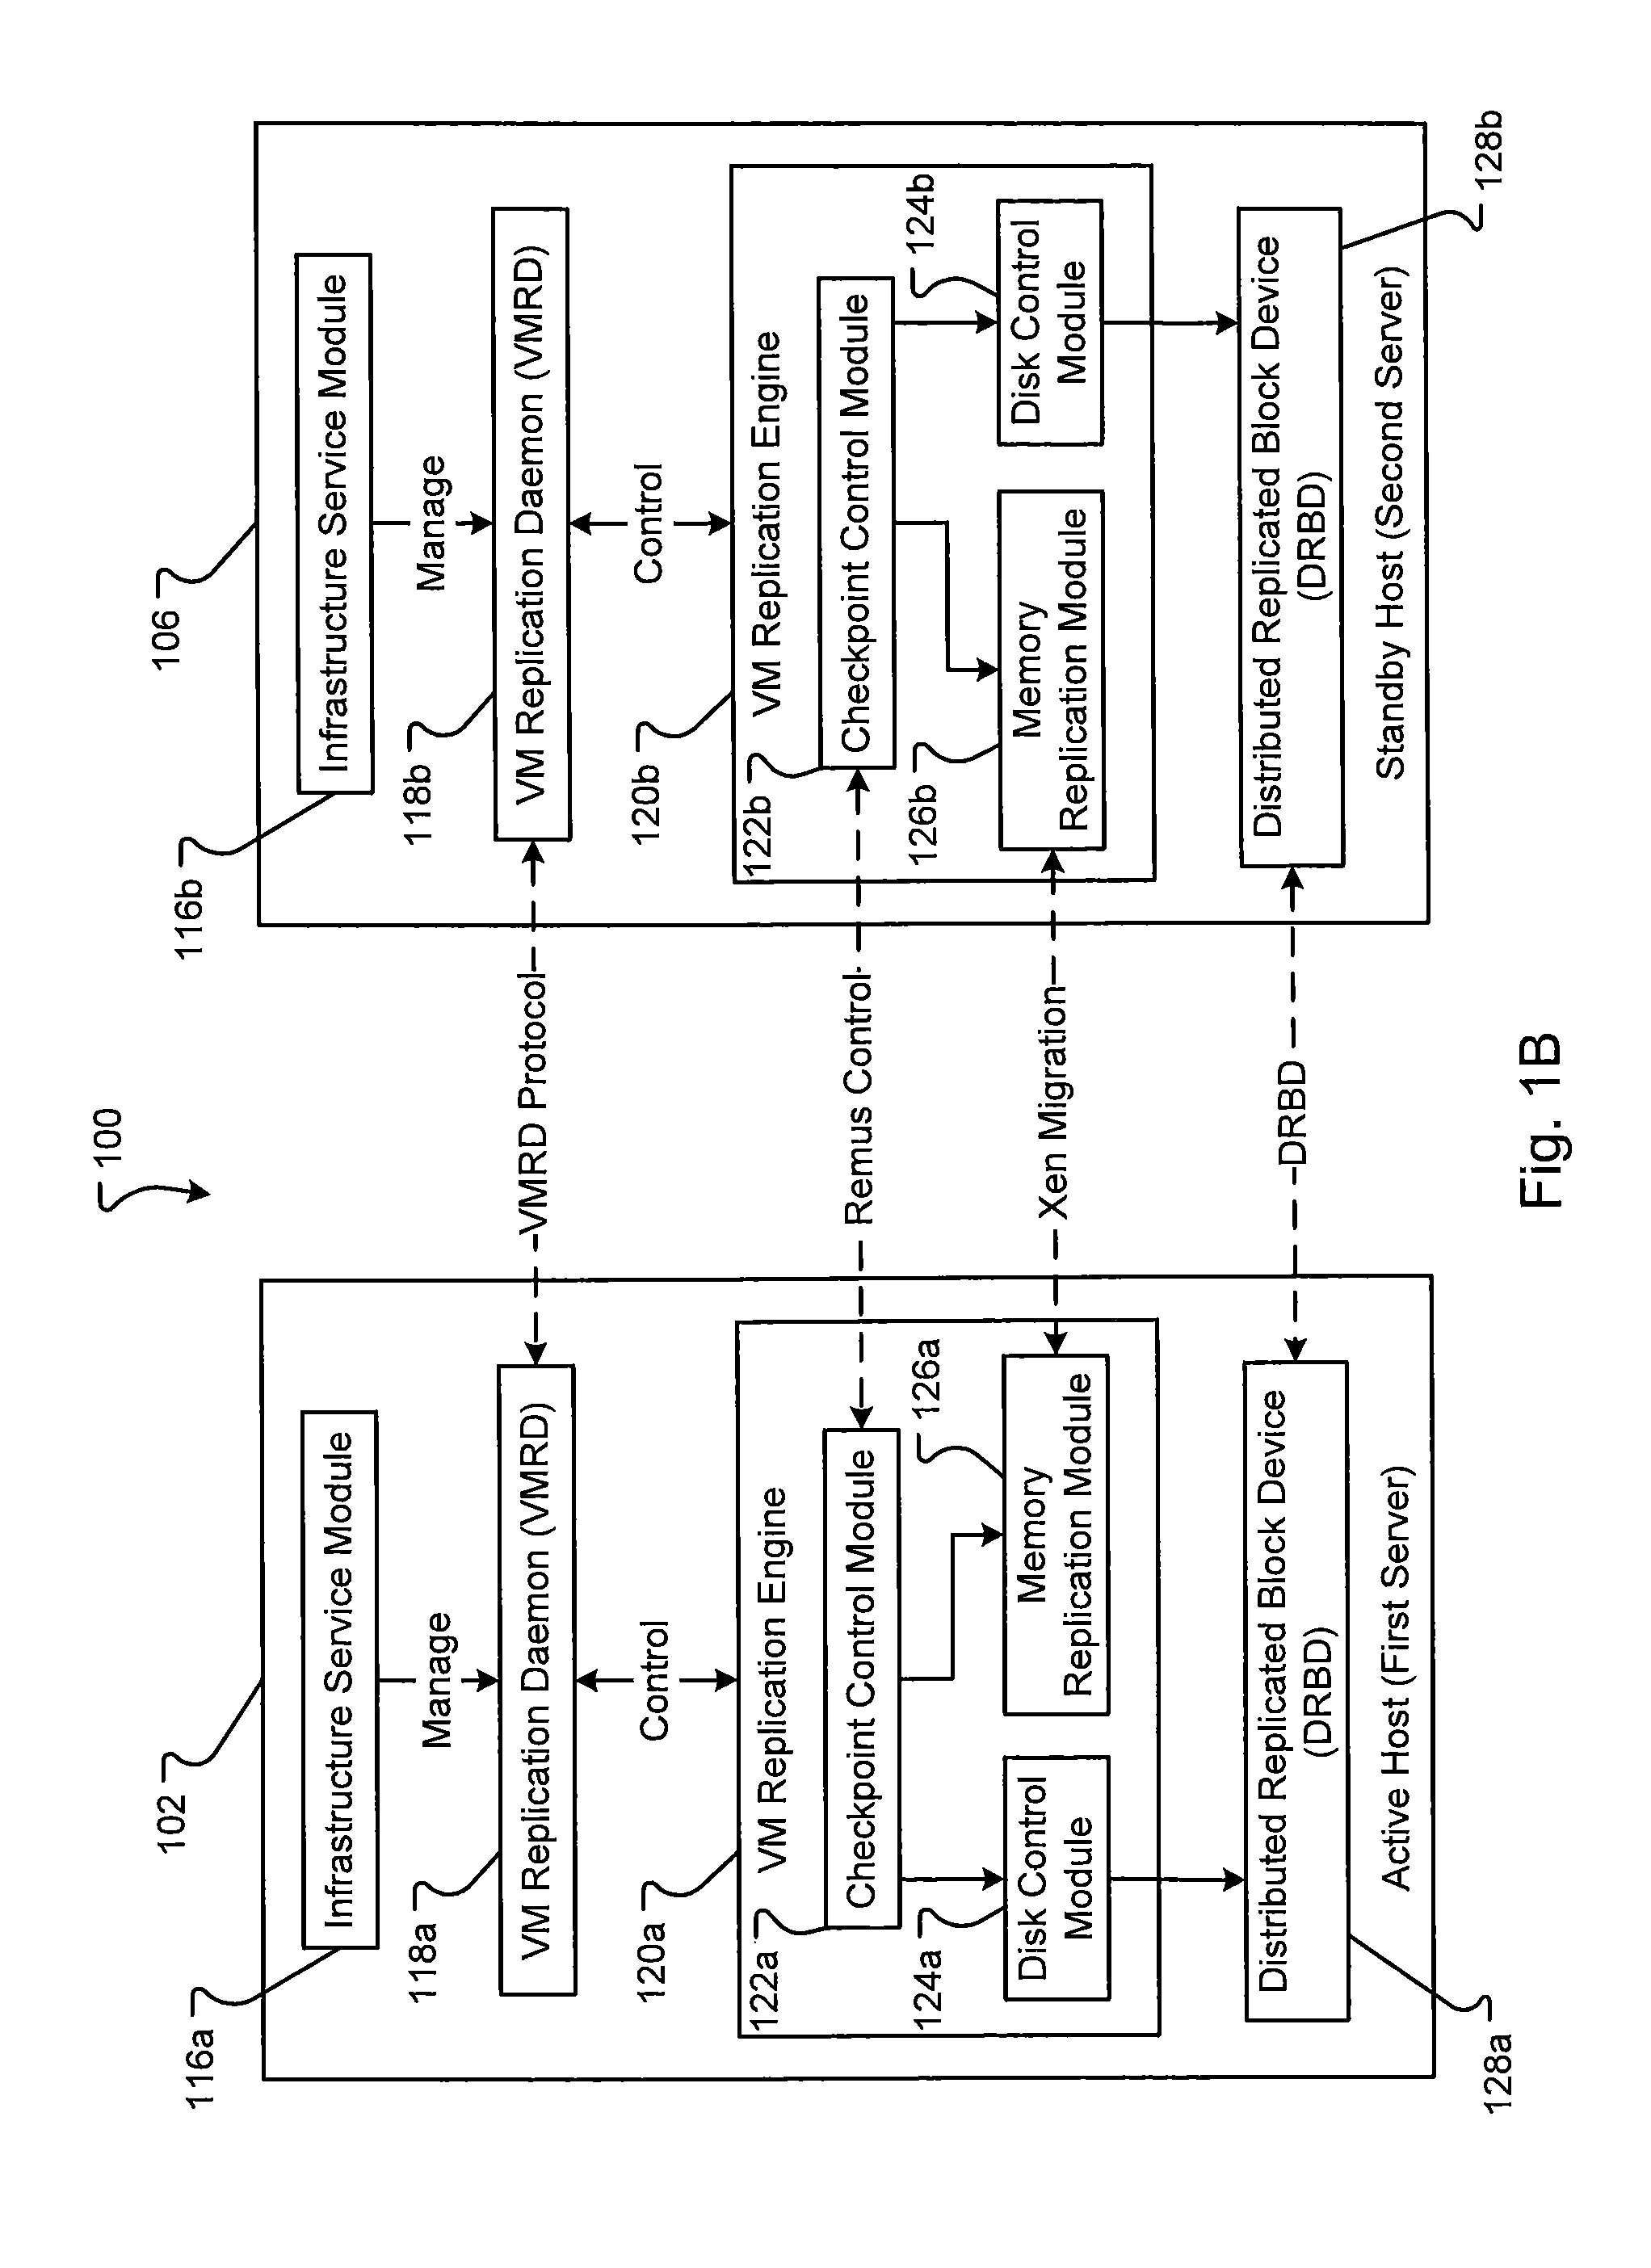 Method and apparatus for high availability (HA) protection of a running virtual machine (VM)